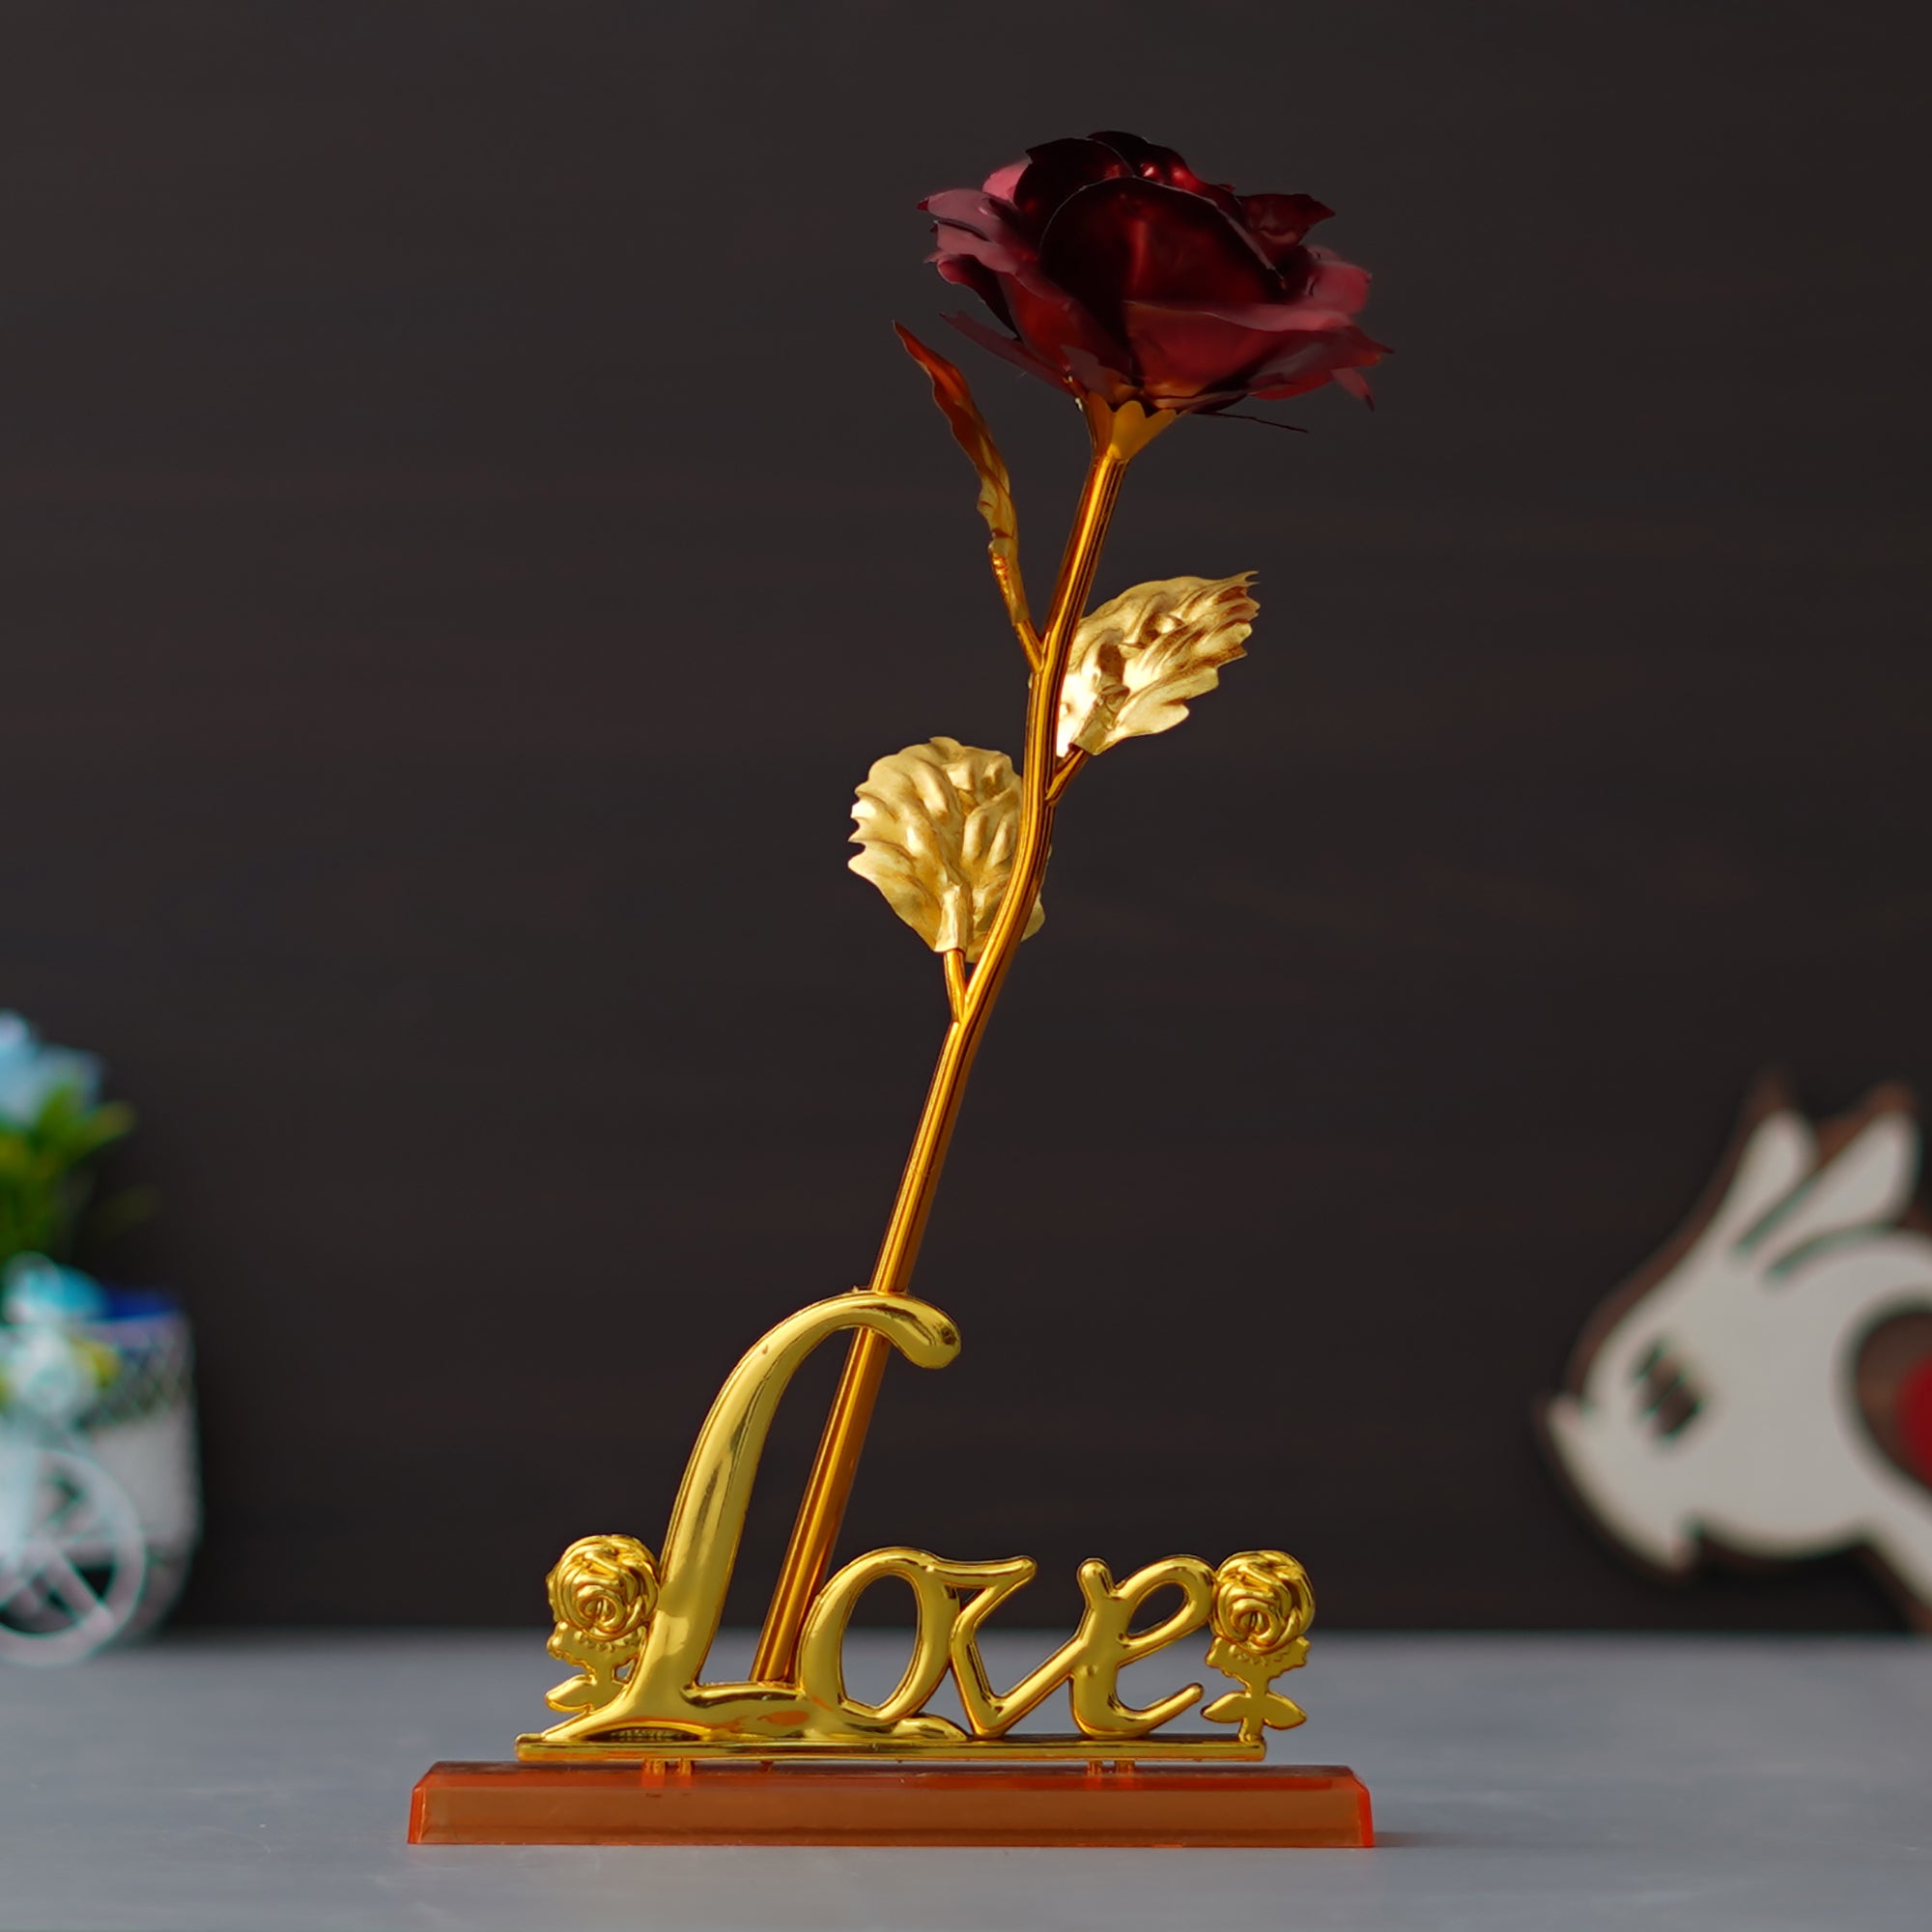 Valentine Combo of Love Golden Red Rose Table Decor Gift Set Showpiece, Colorful Girl and Boy "Sweet I Love You" Kissing Figurine 1